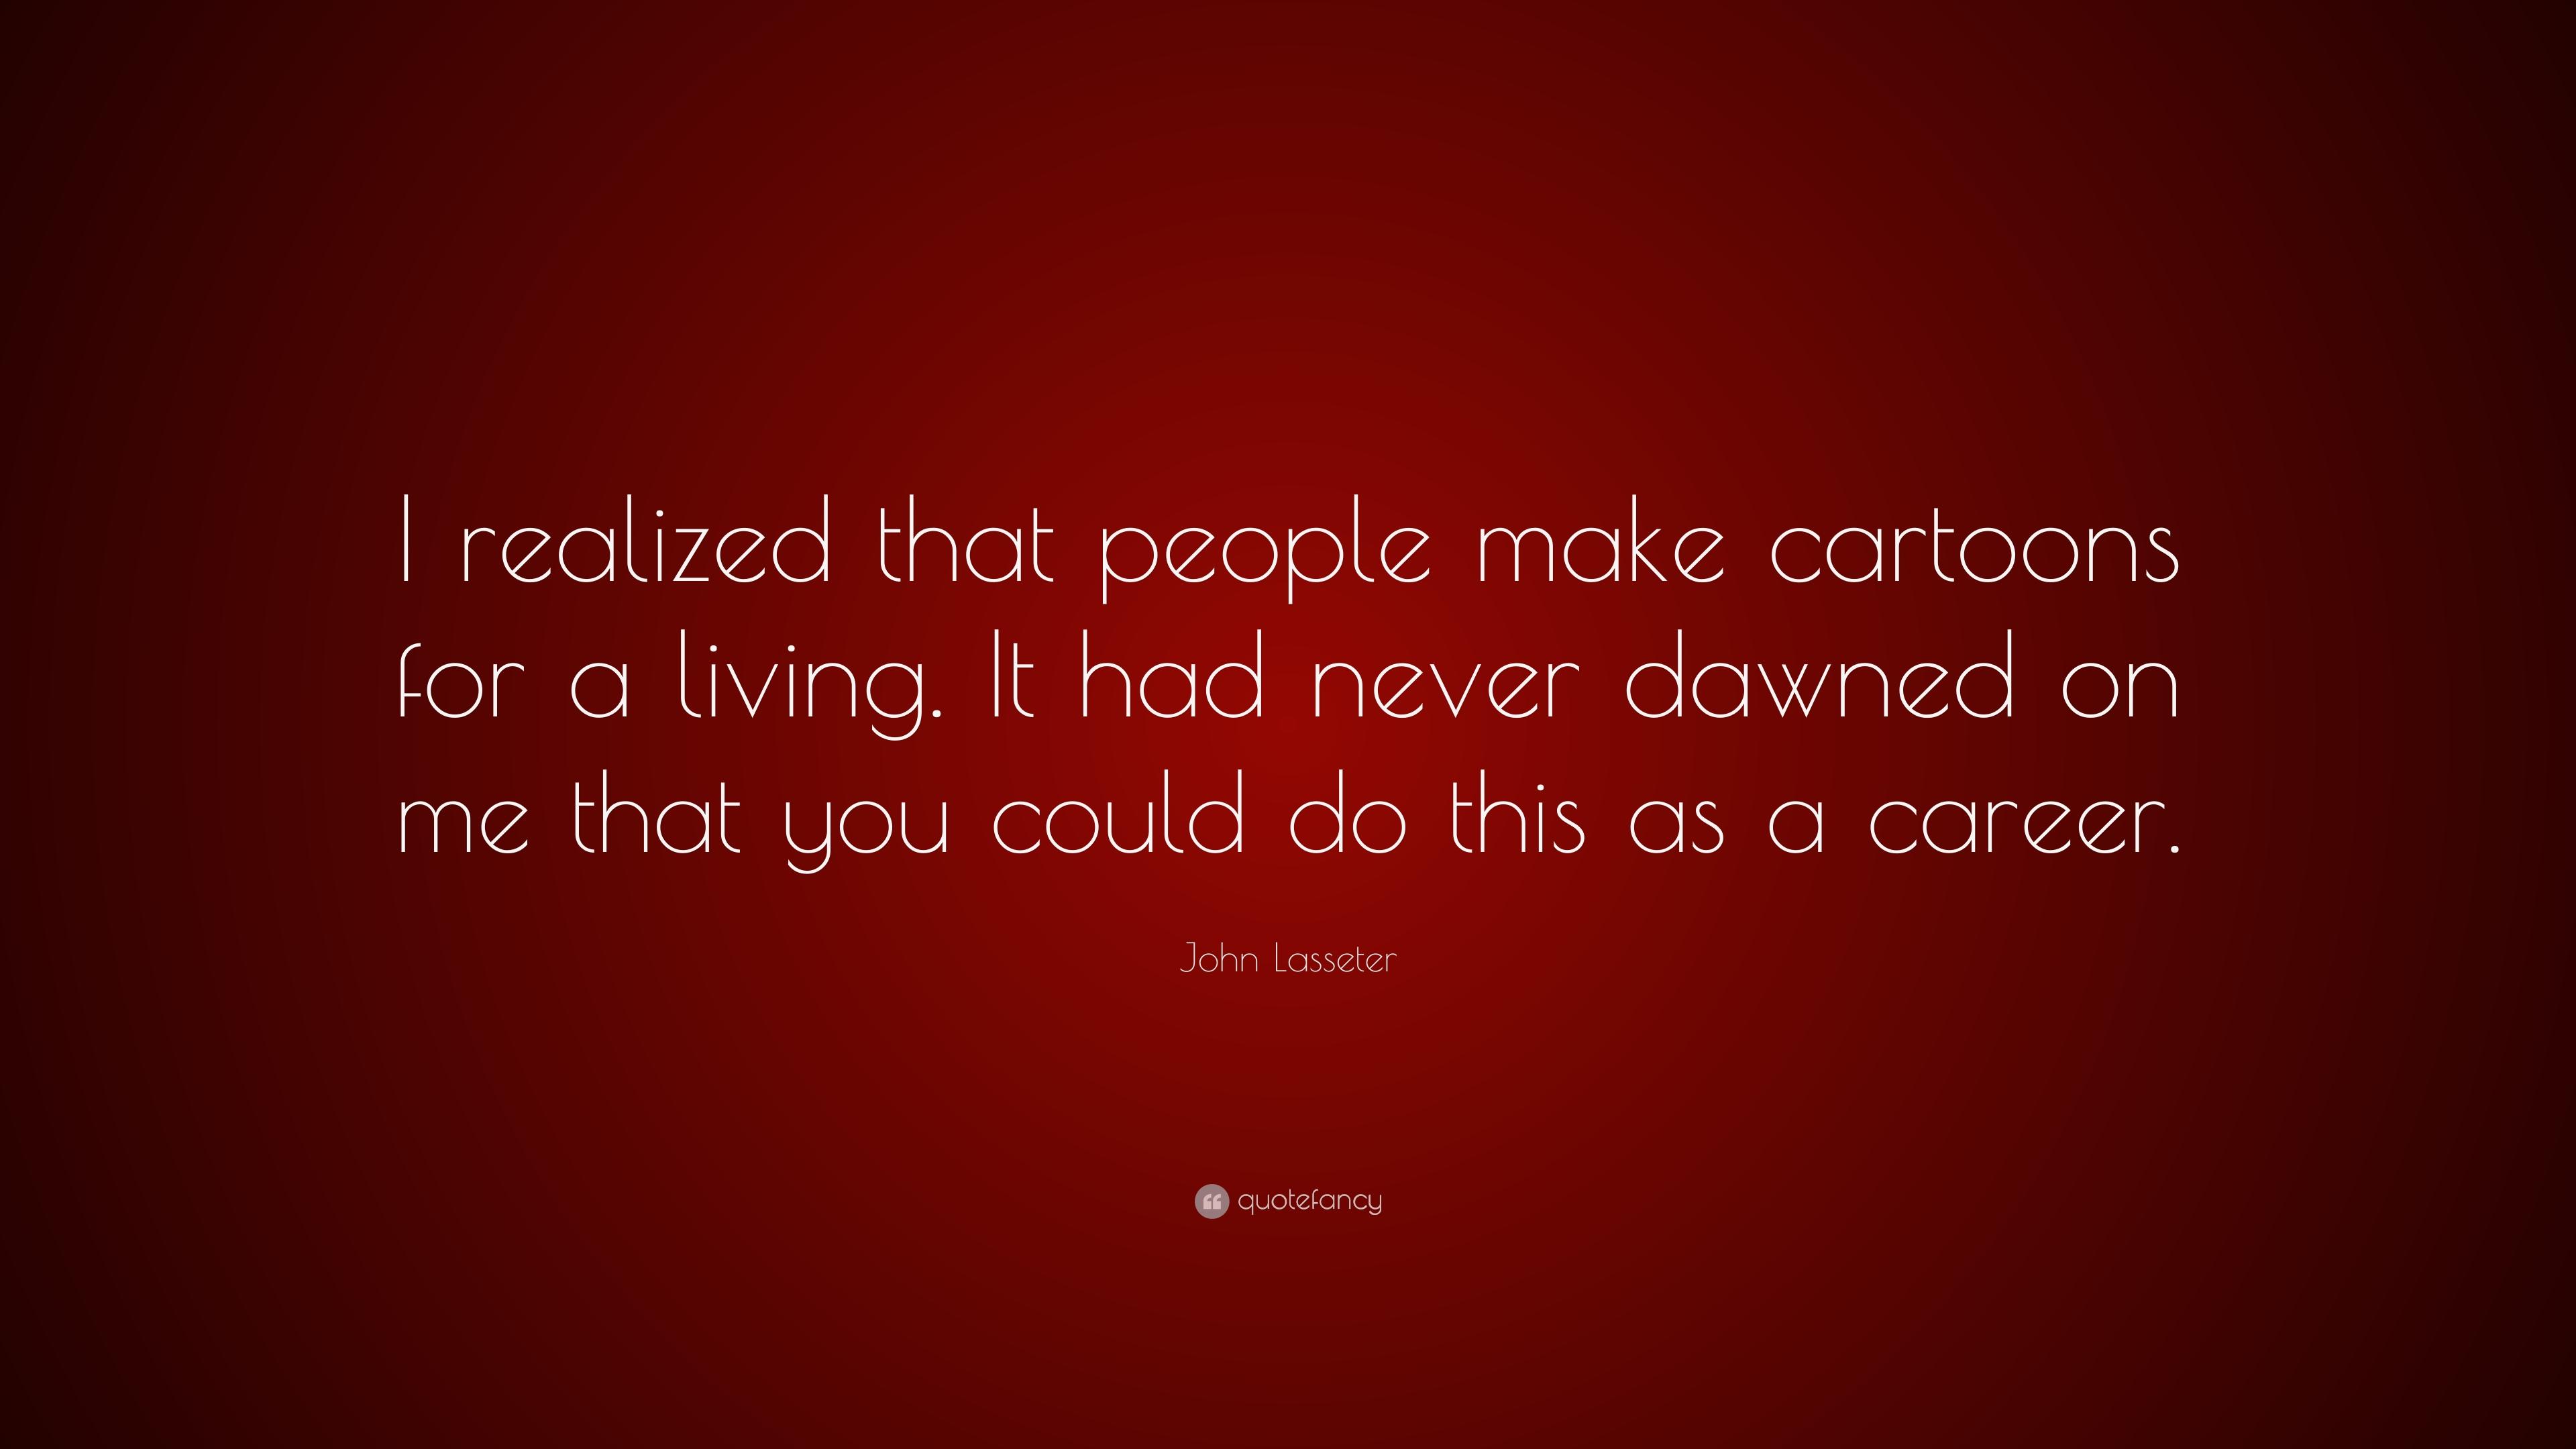 John Lasseter Quote: “I realized that people make cartoons for a